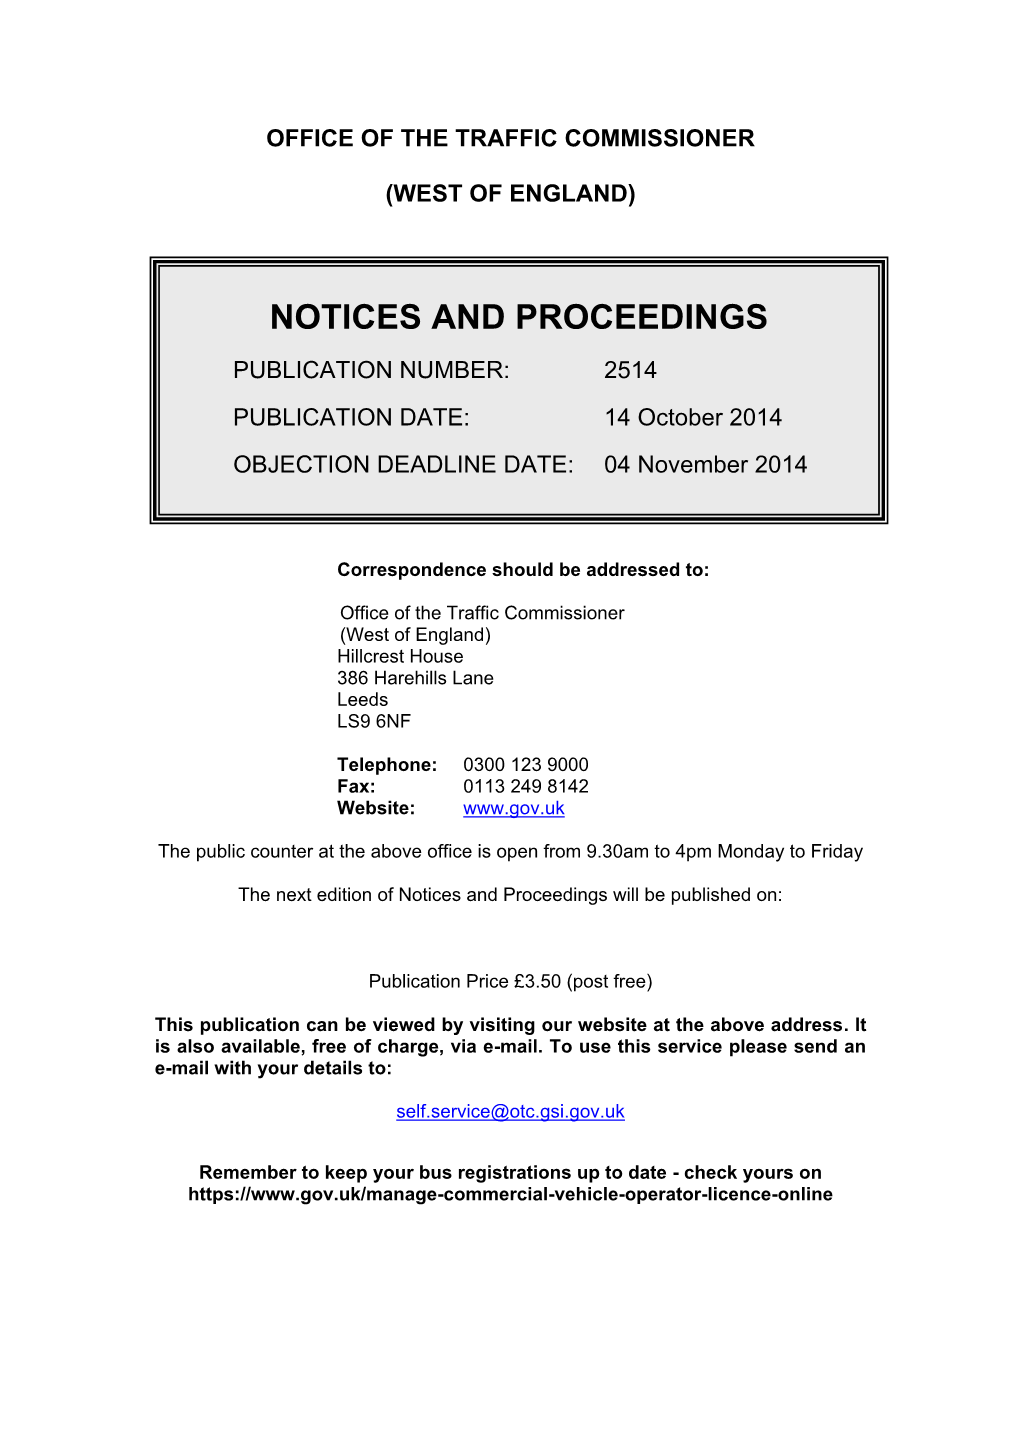 Notices and Proceedings 14 October 2014